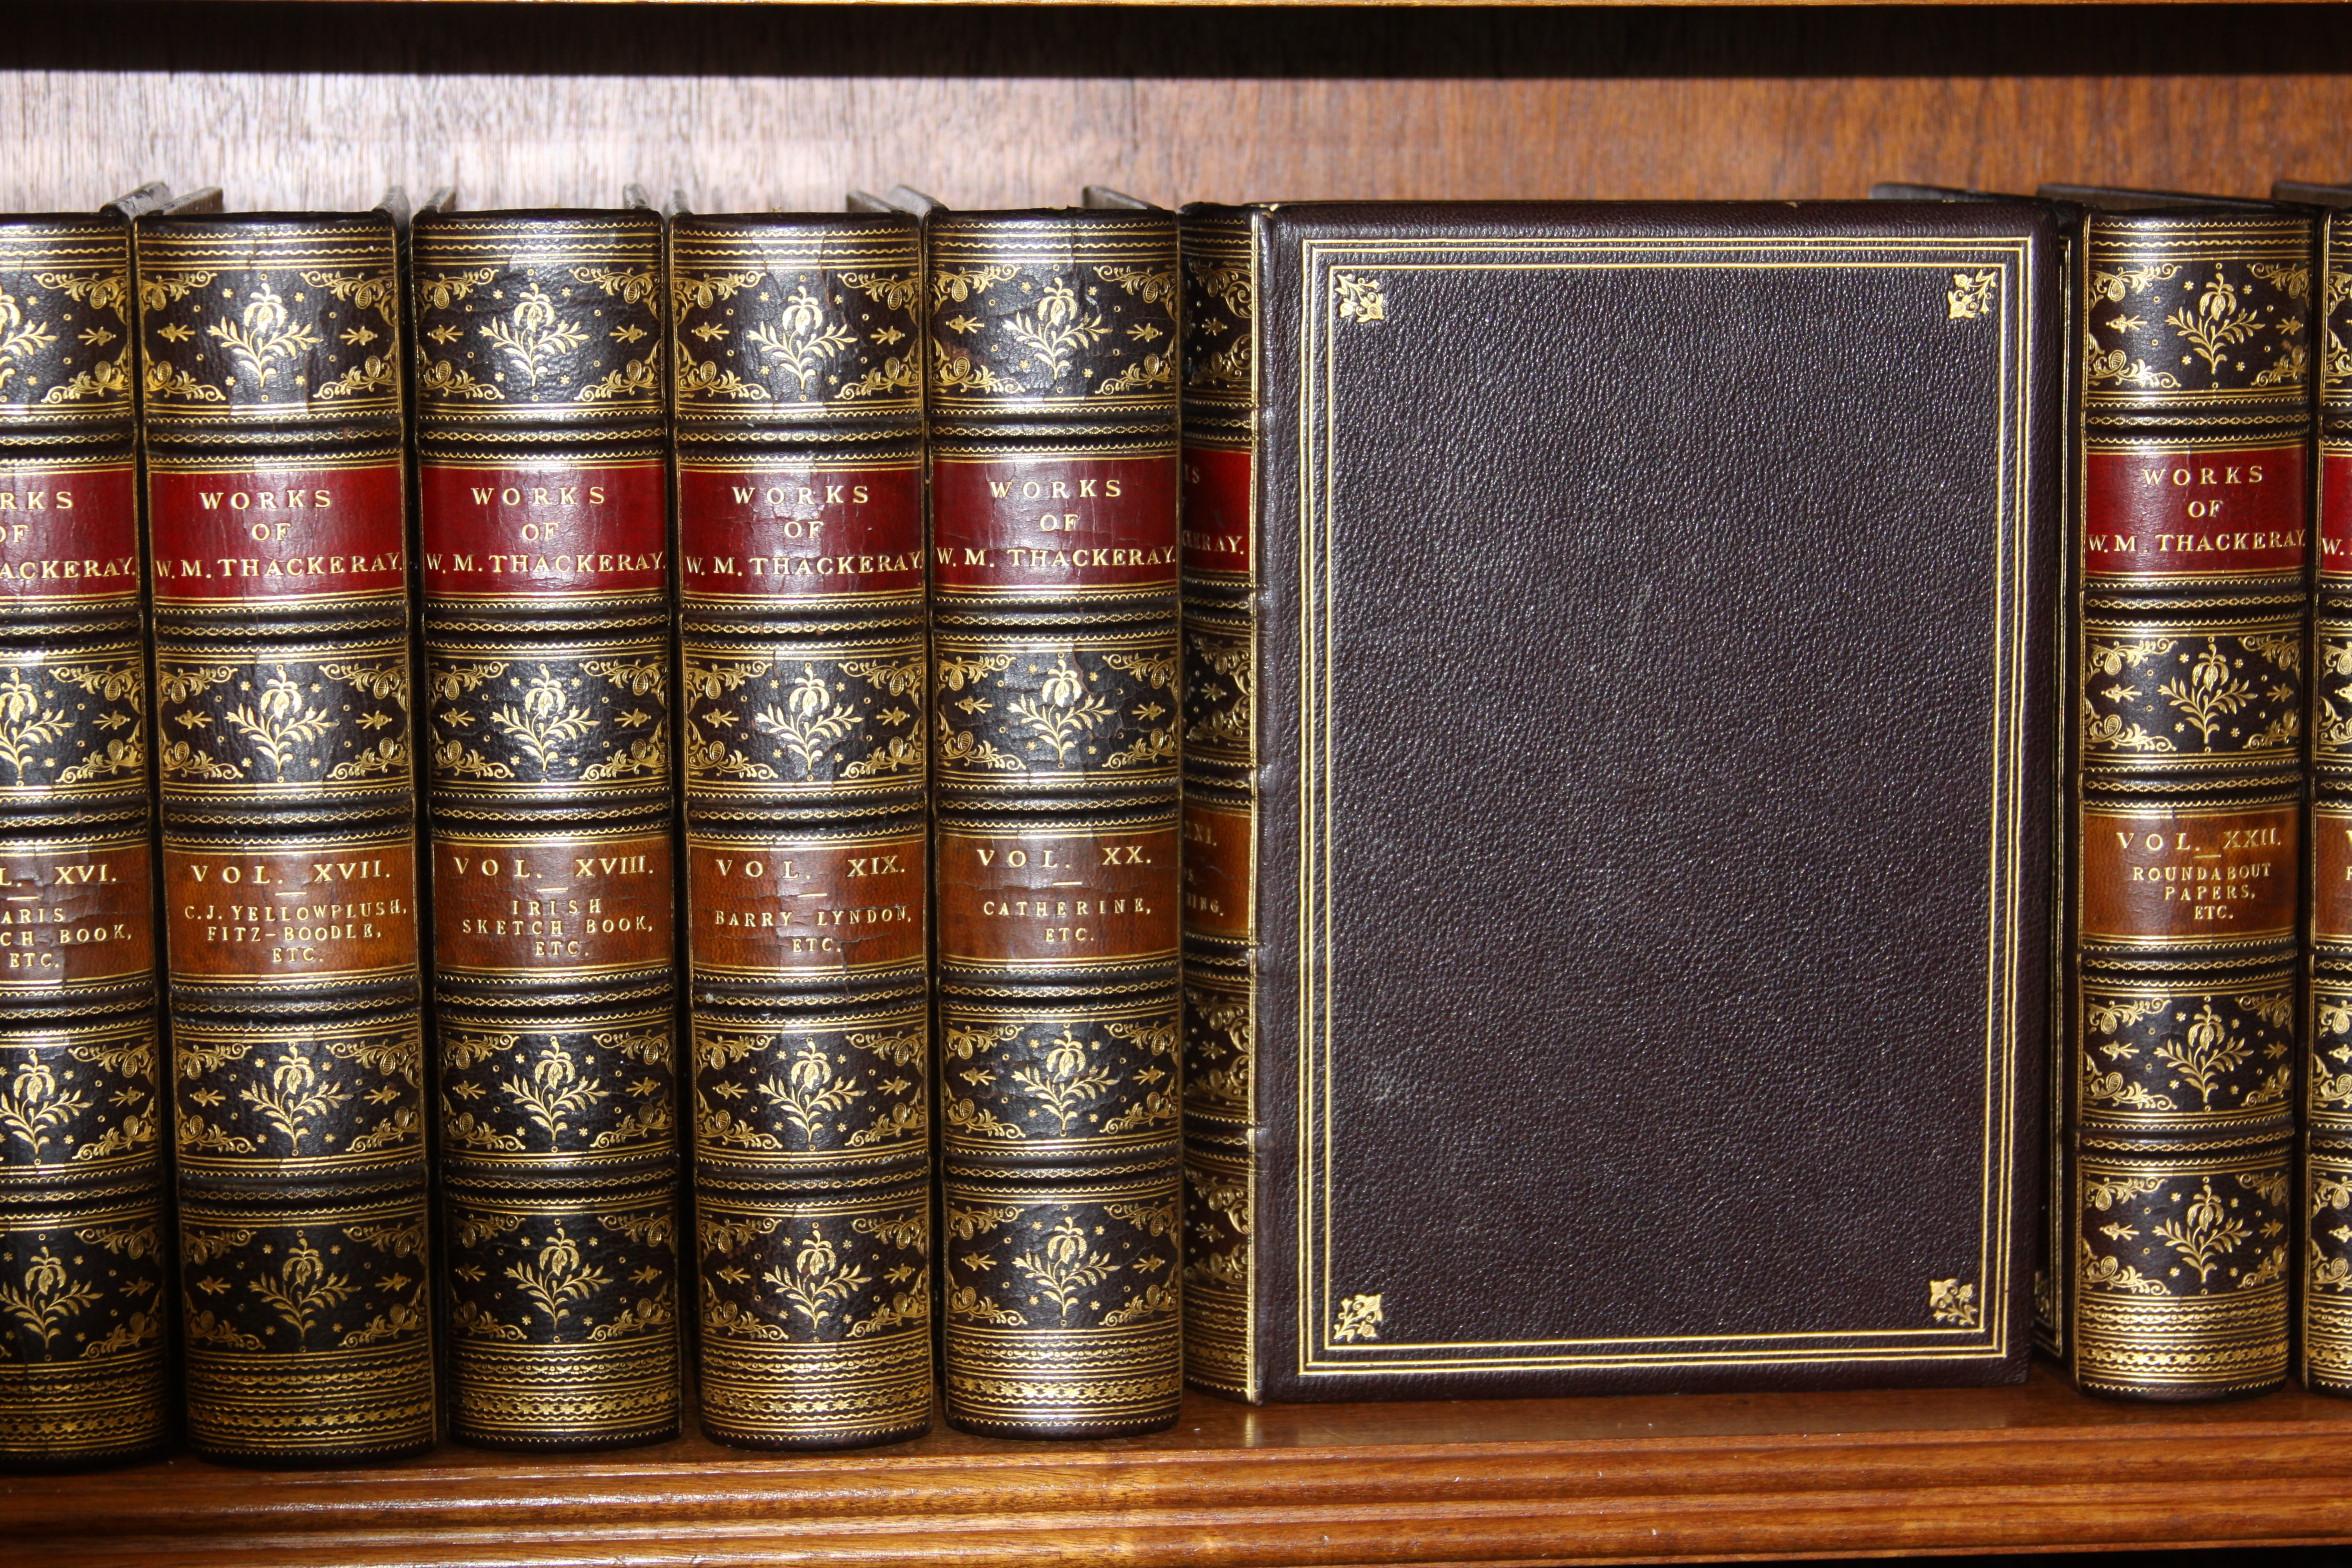 Twenty-six volumes The Writings of William Makepeace Thackeray. Published: London; Smith Elder and Company. 1878. Complete with illustrations by the author Thackeray. Limited to one thousand copies which this is number 232. Handsomely bound in full